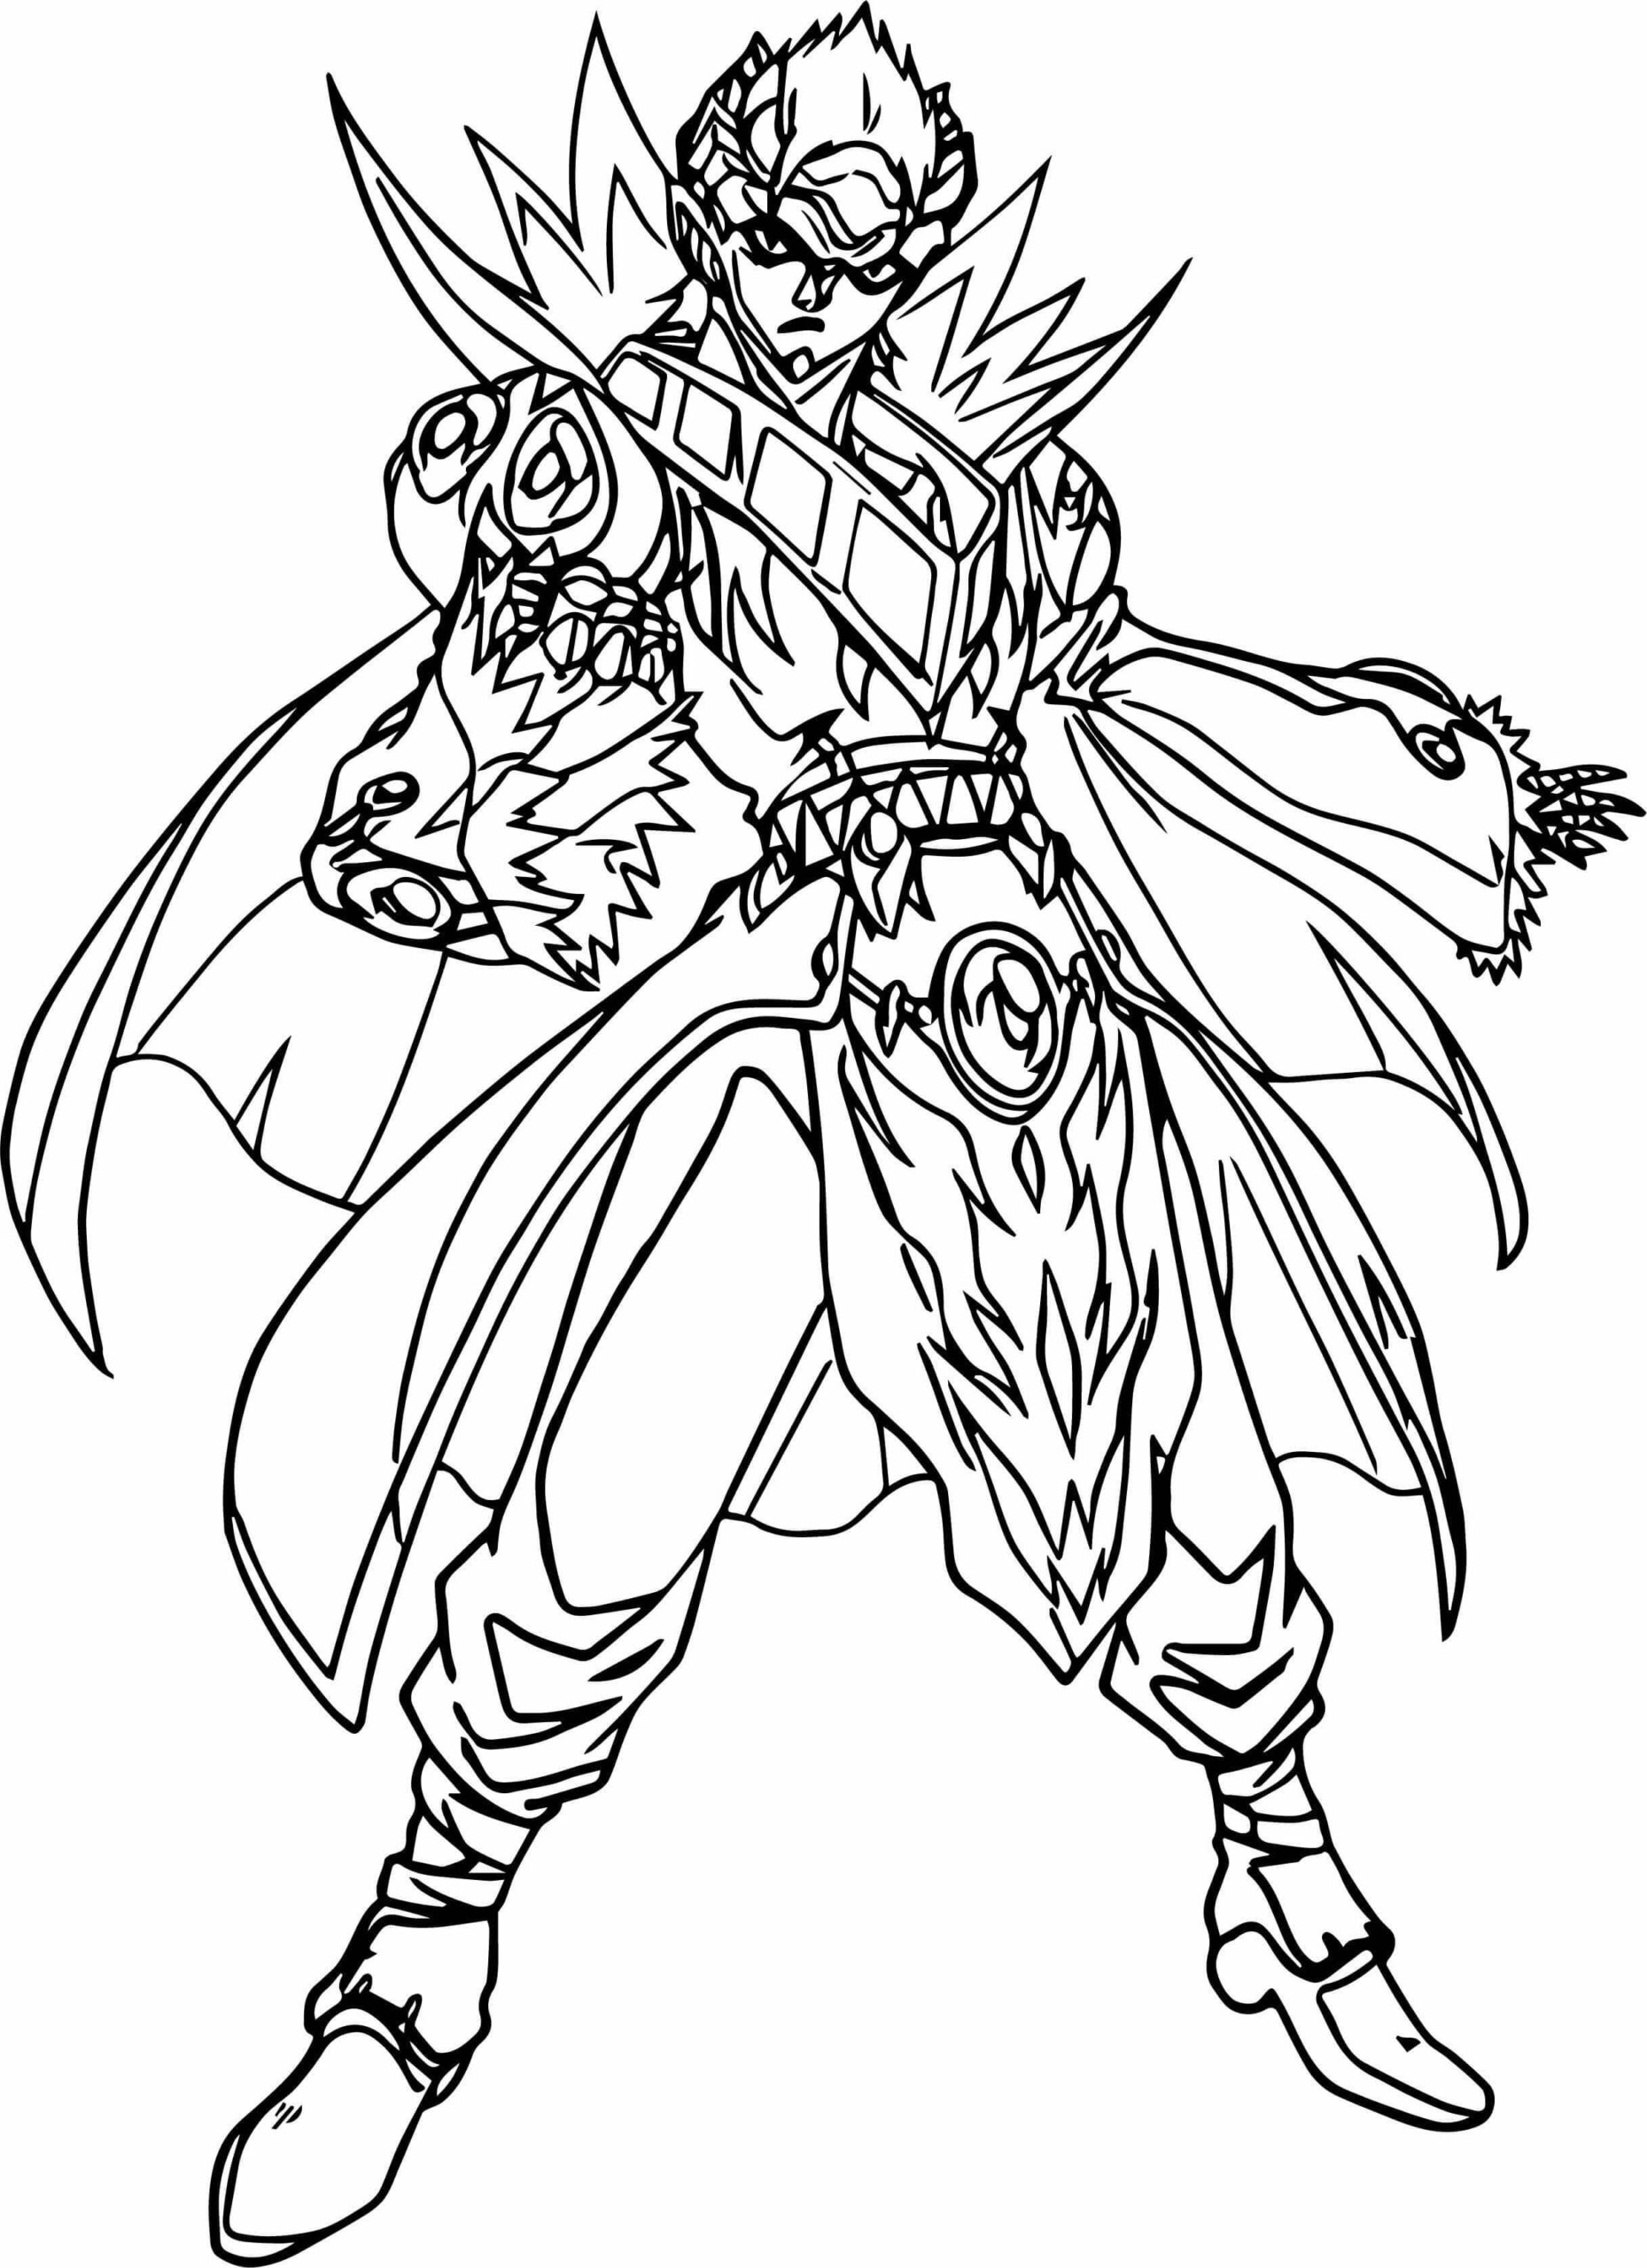 Samurai Fighting Style coloring page ...